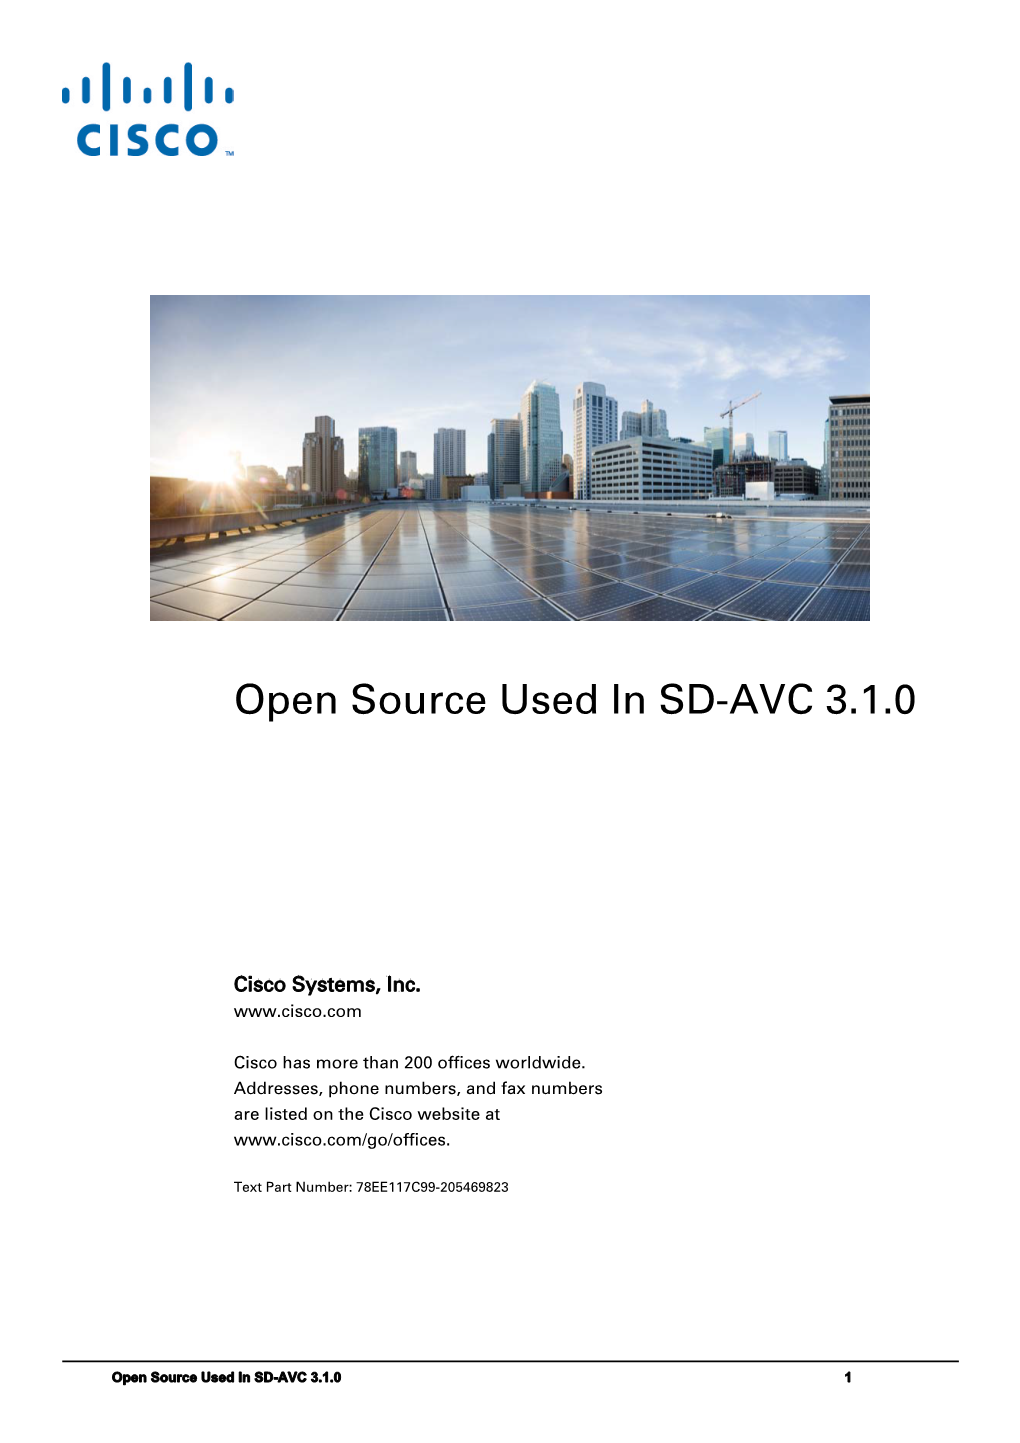 Open Source Used in SD-AVC 3.1.0